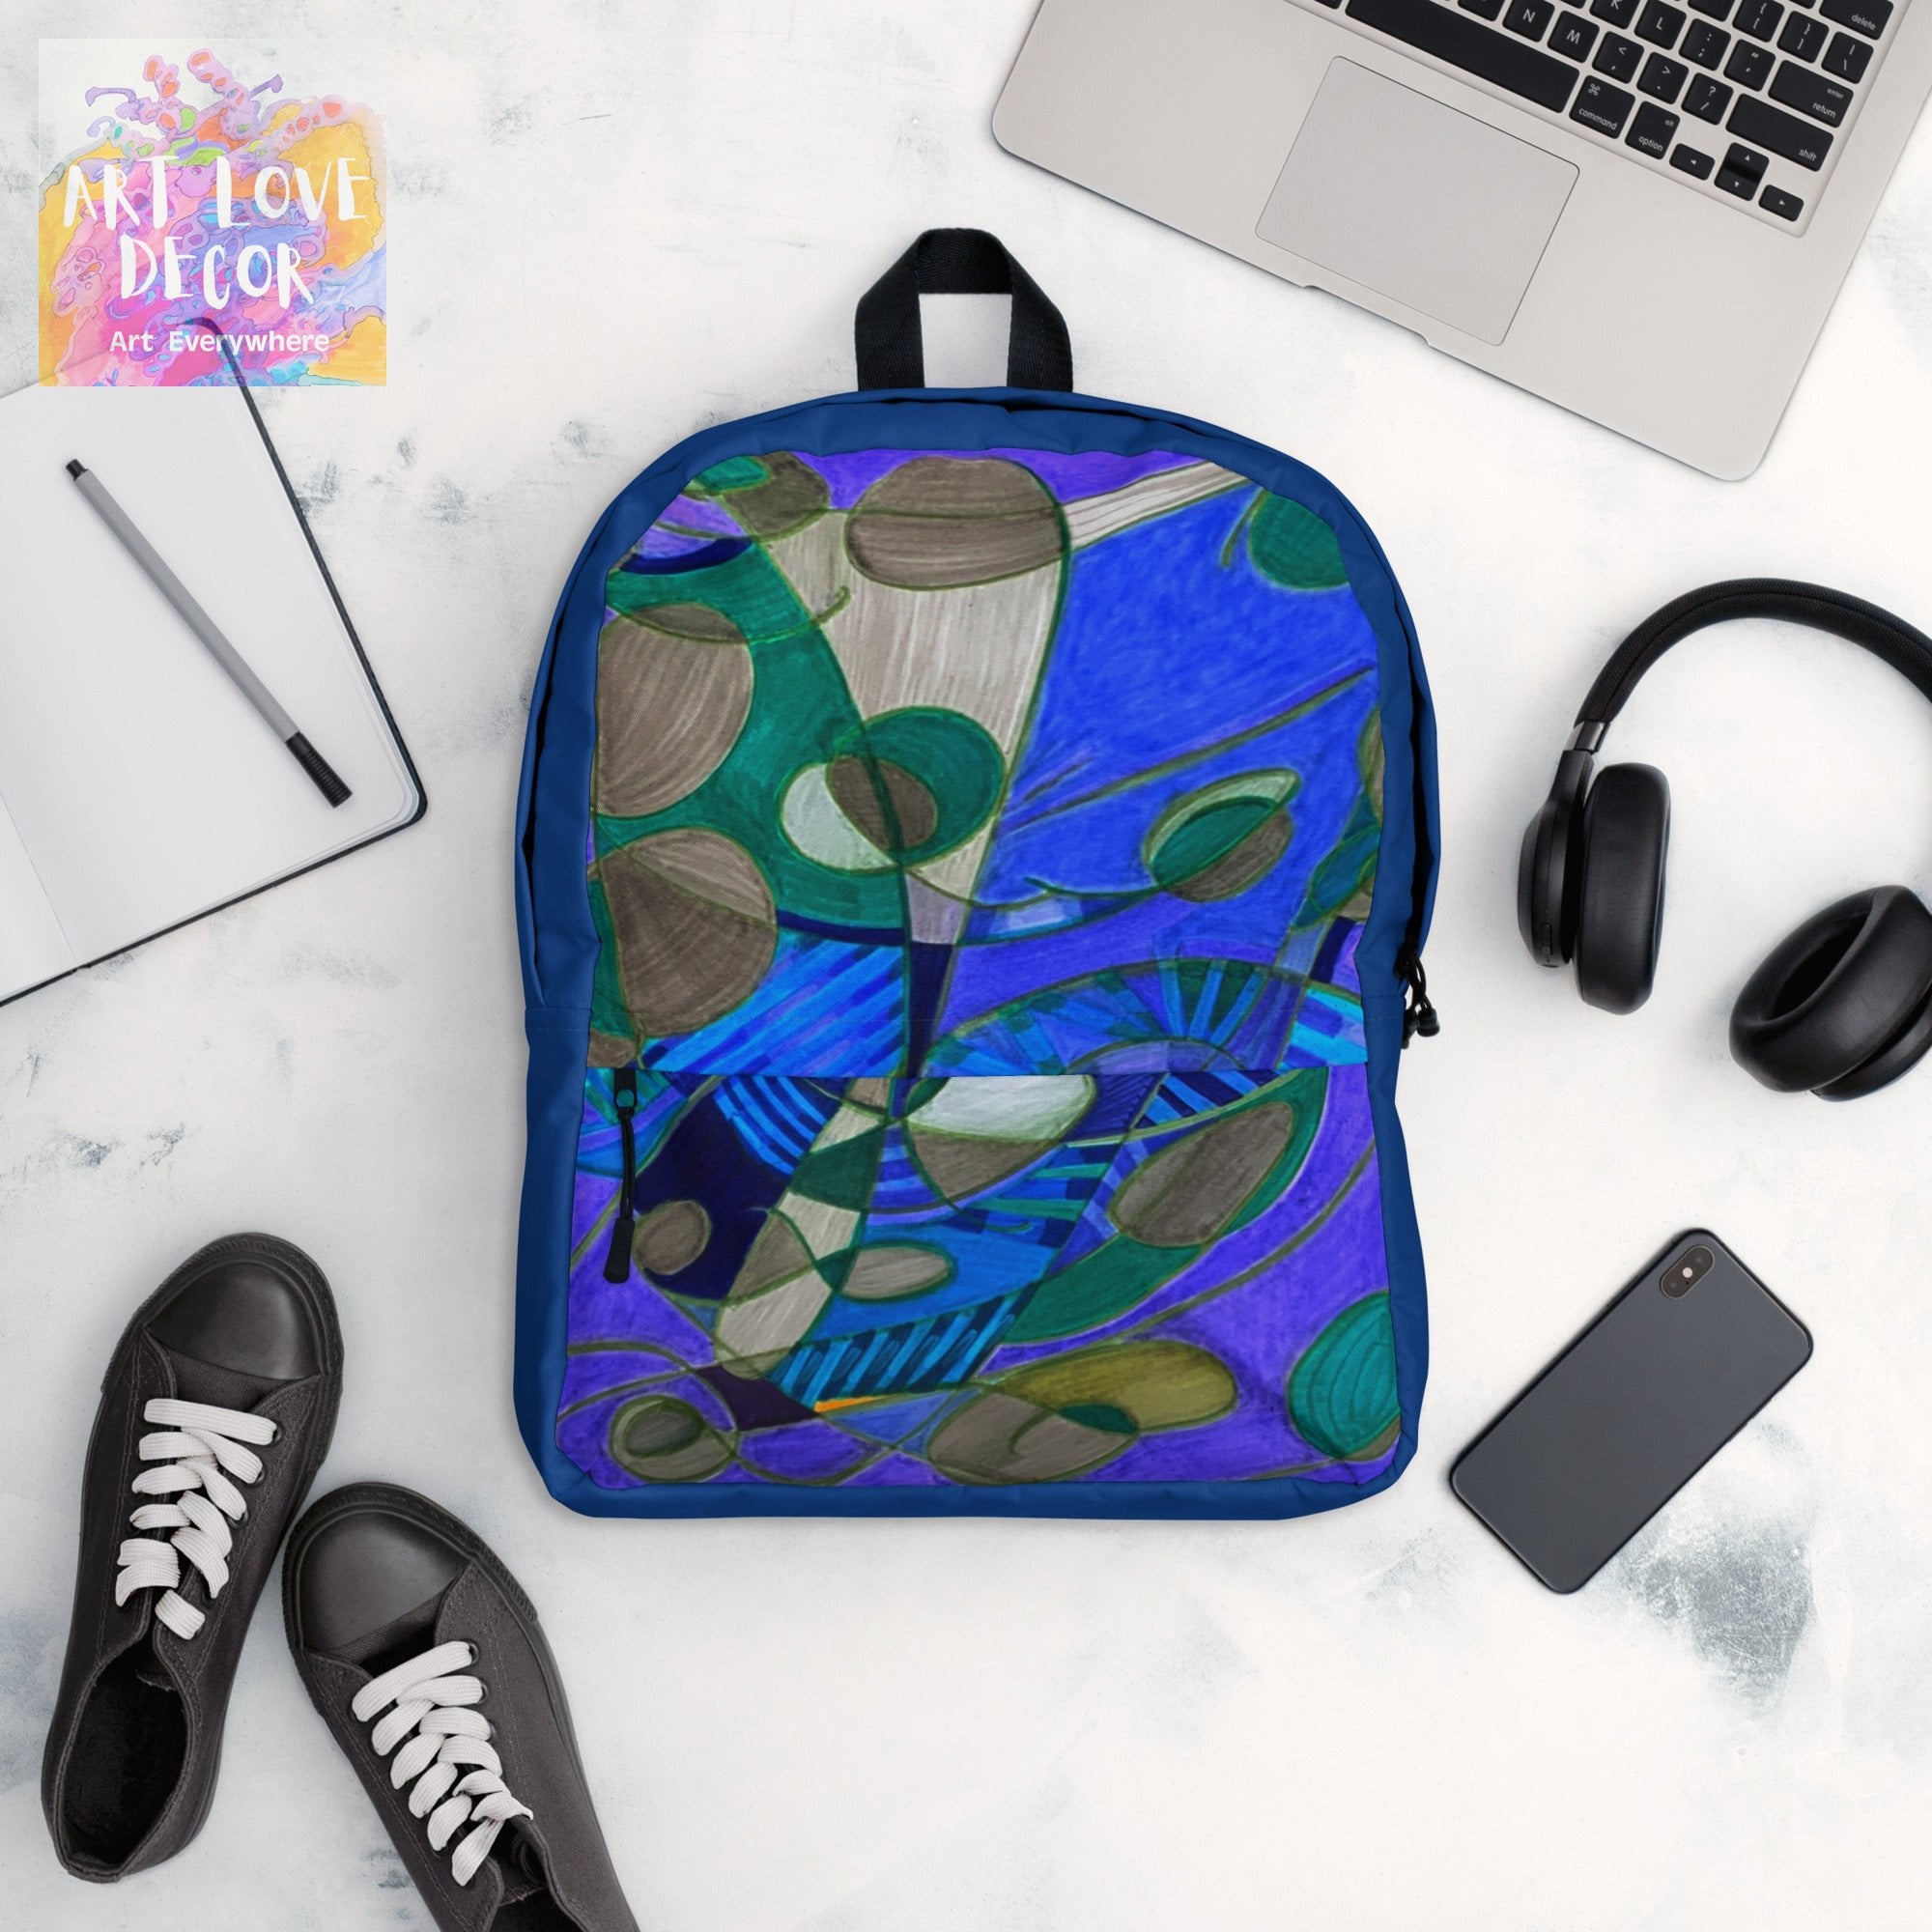 Knot Anymore Abstract Backpack - Art Love Decor